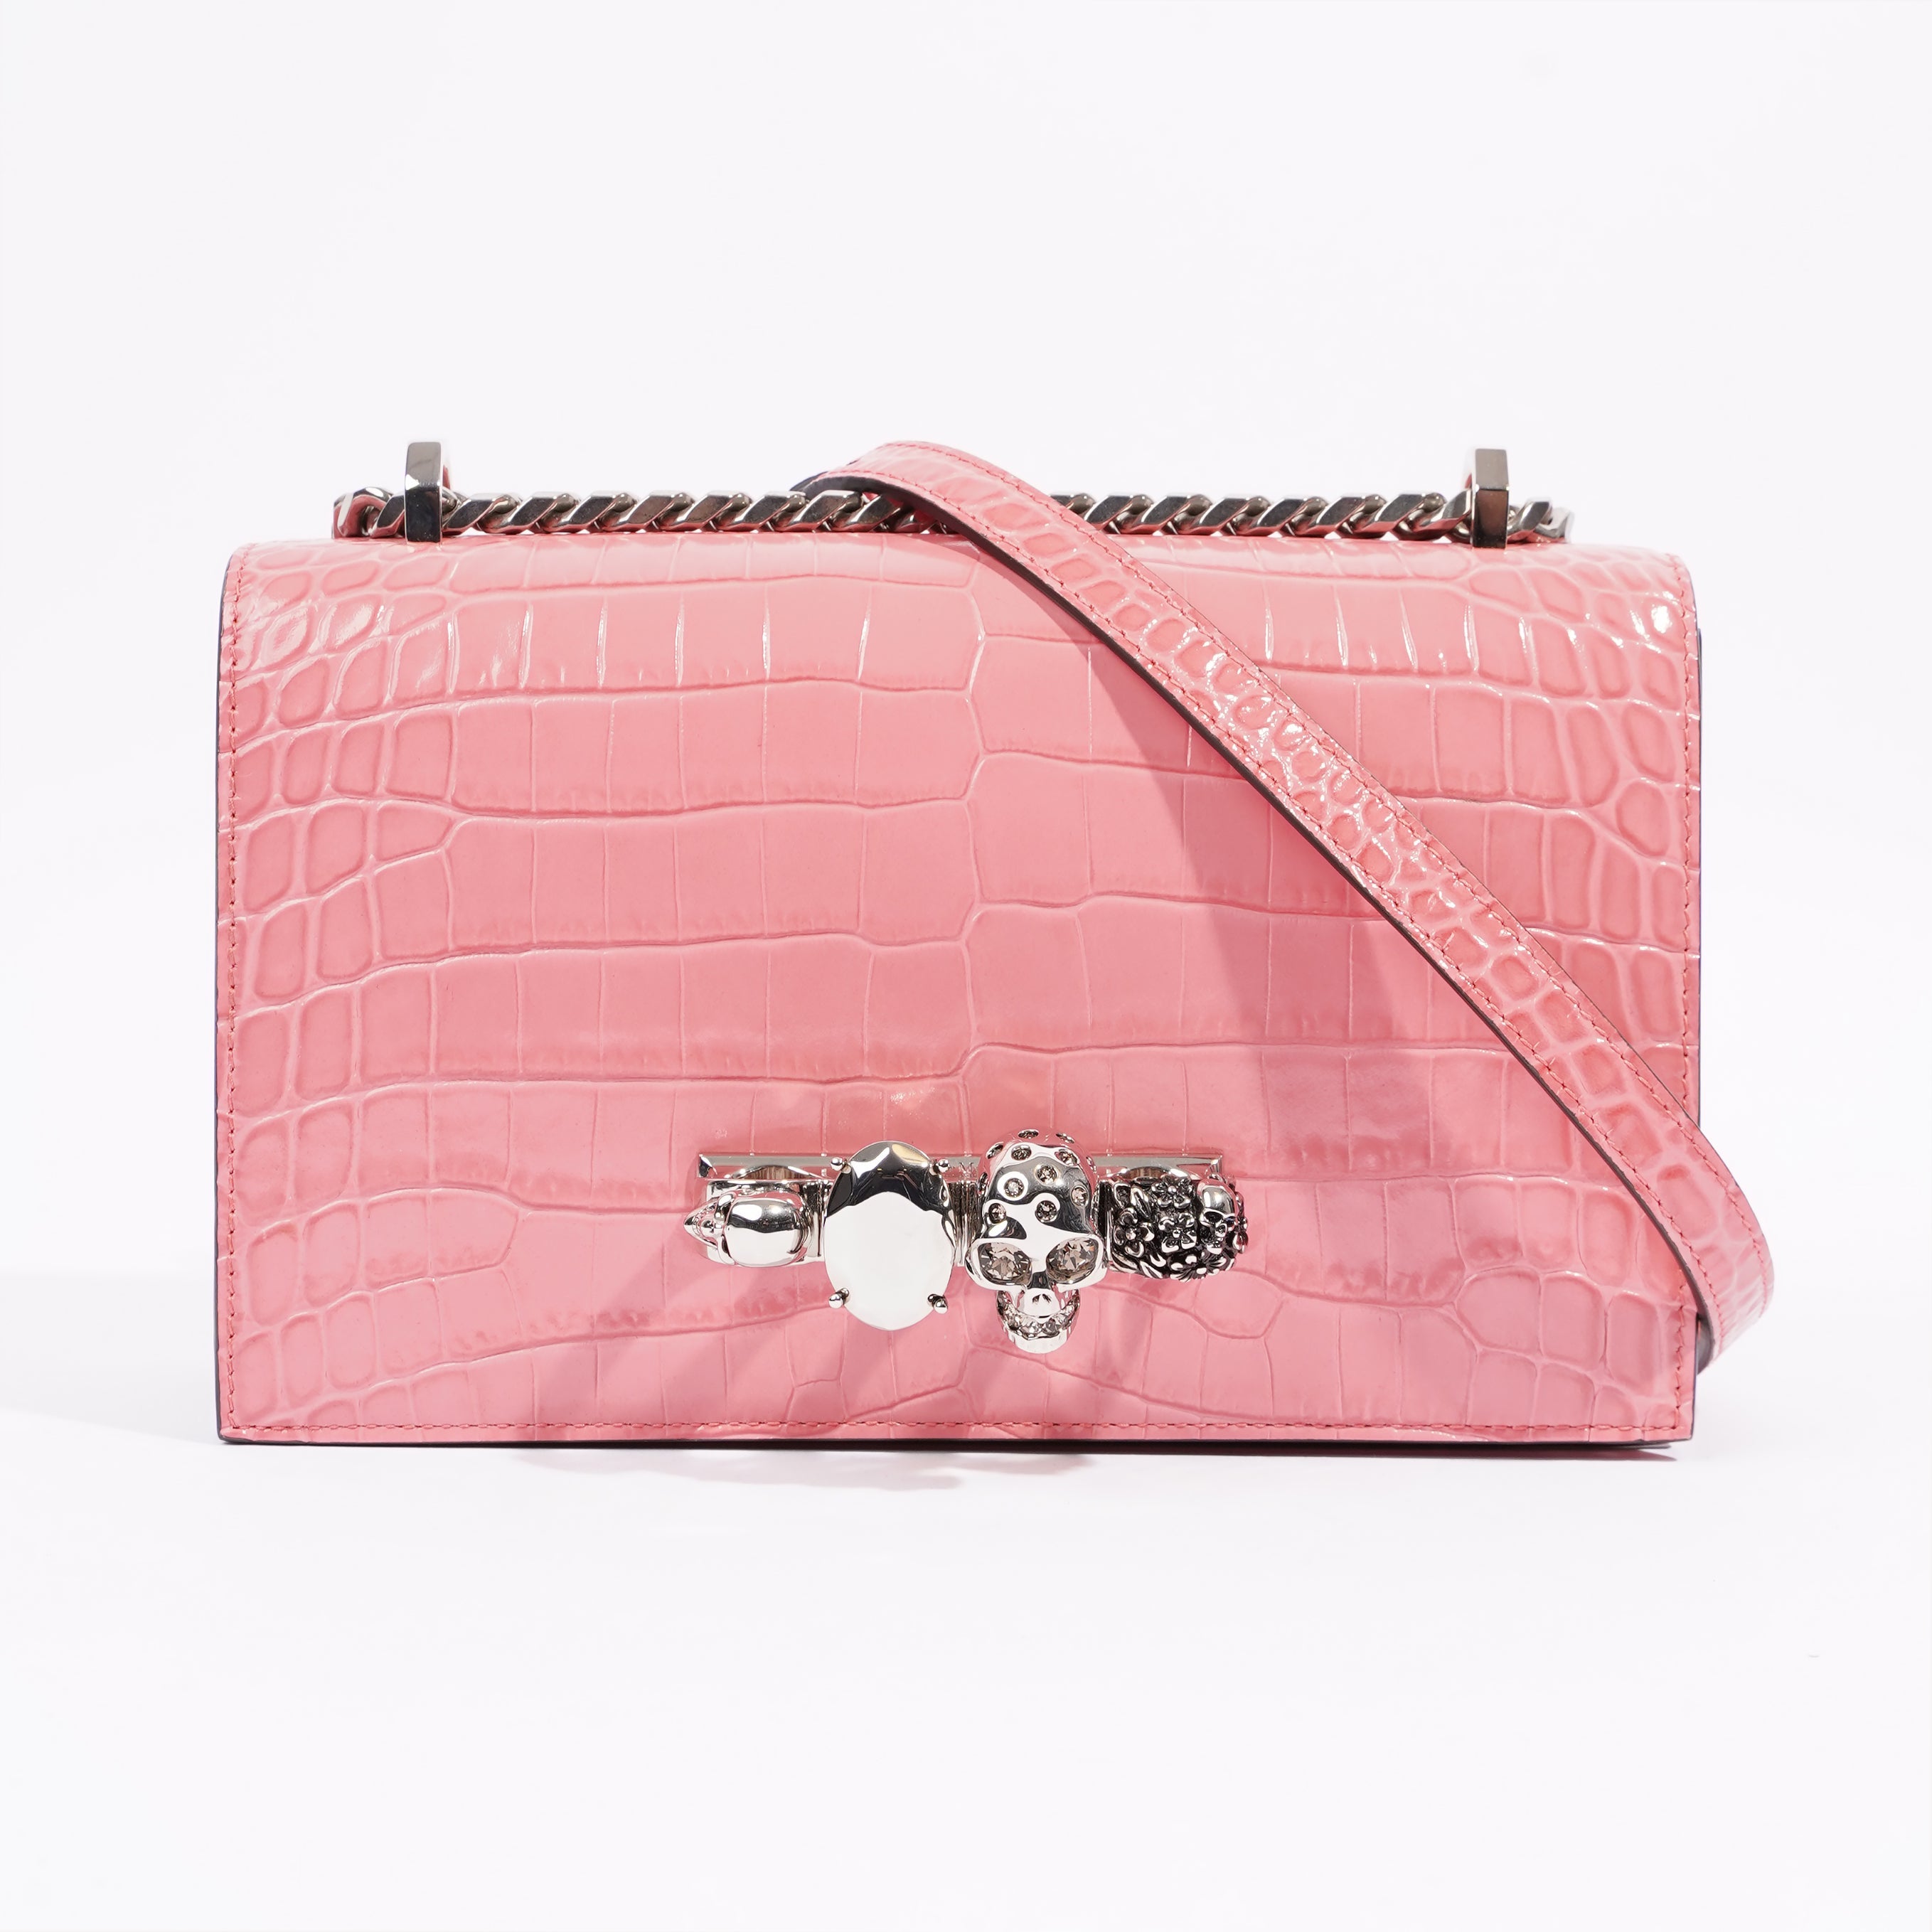 Jewelled Satchel Bag Pink Embossed Leather OS